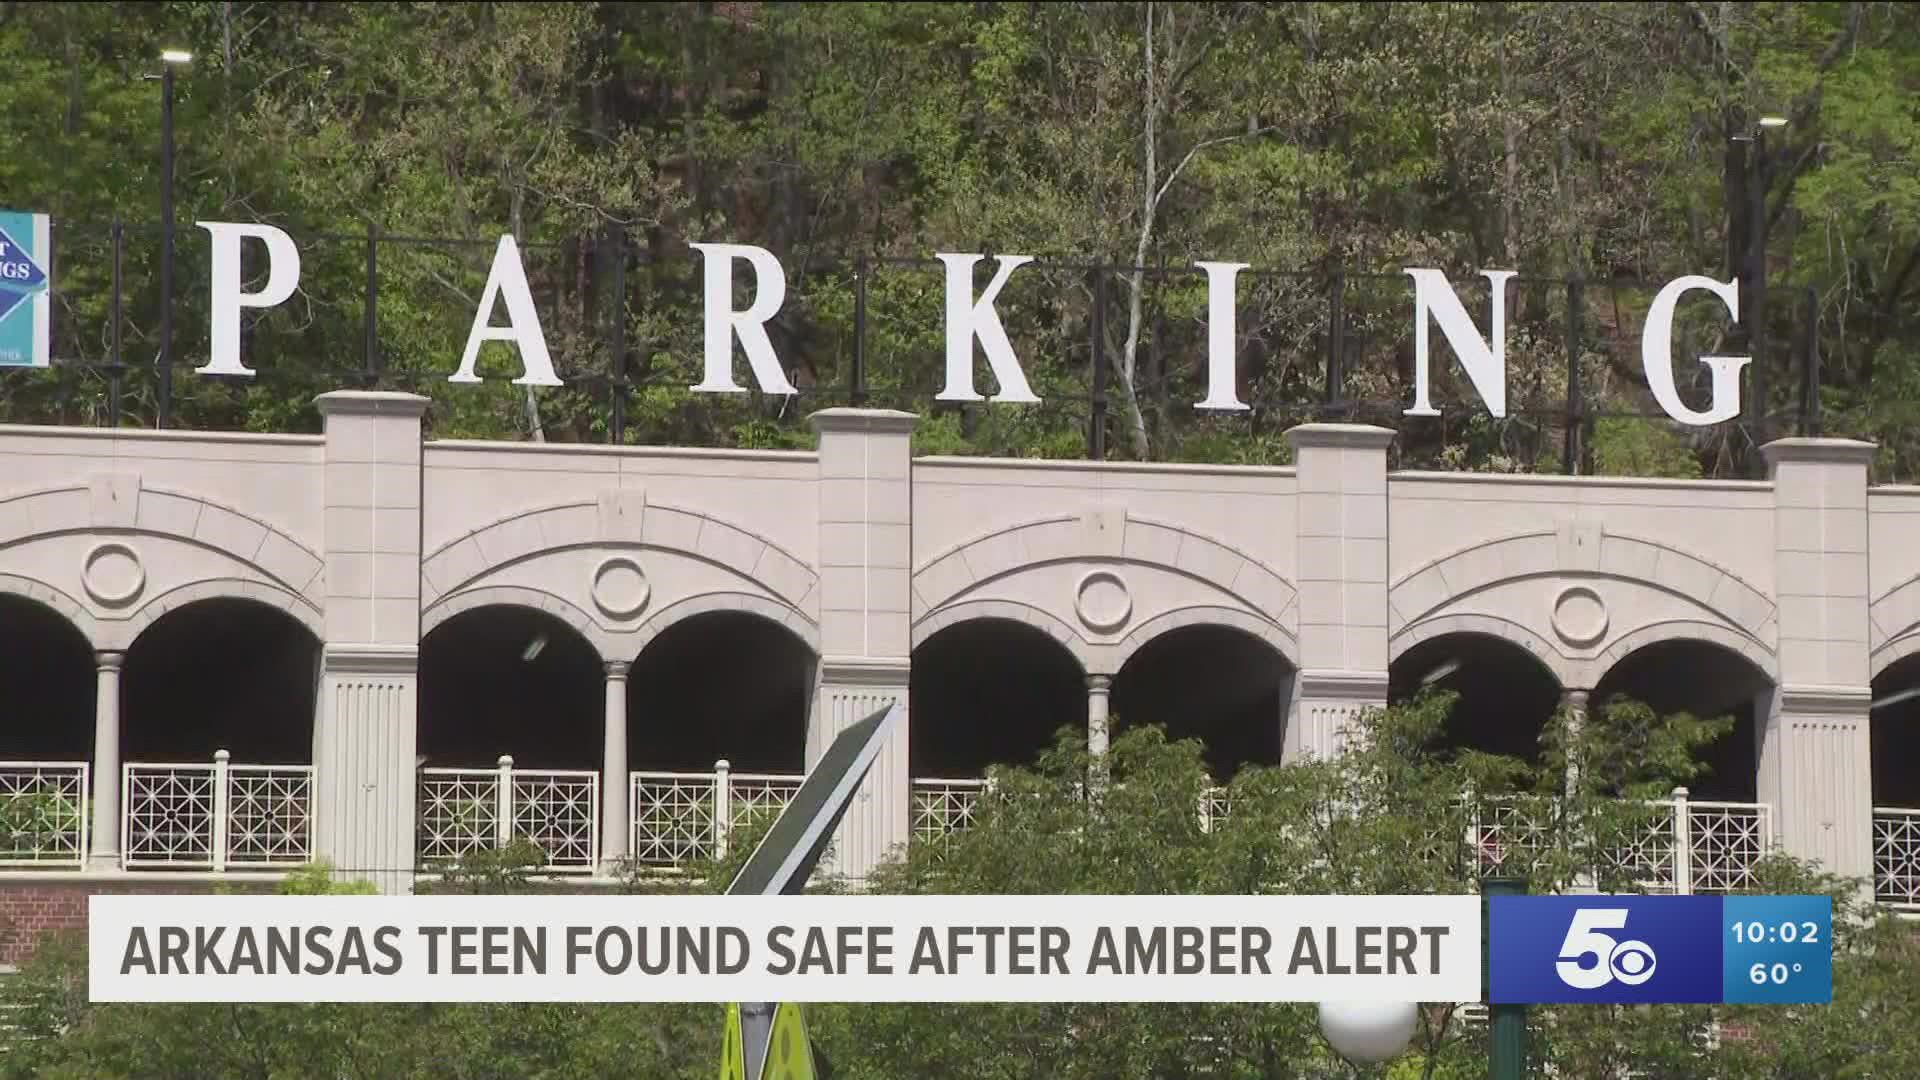 The teen was found safe after being reported missing in Hot Springs and the vehicle of interest has been found.